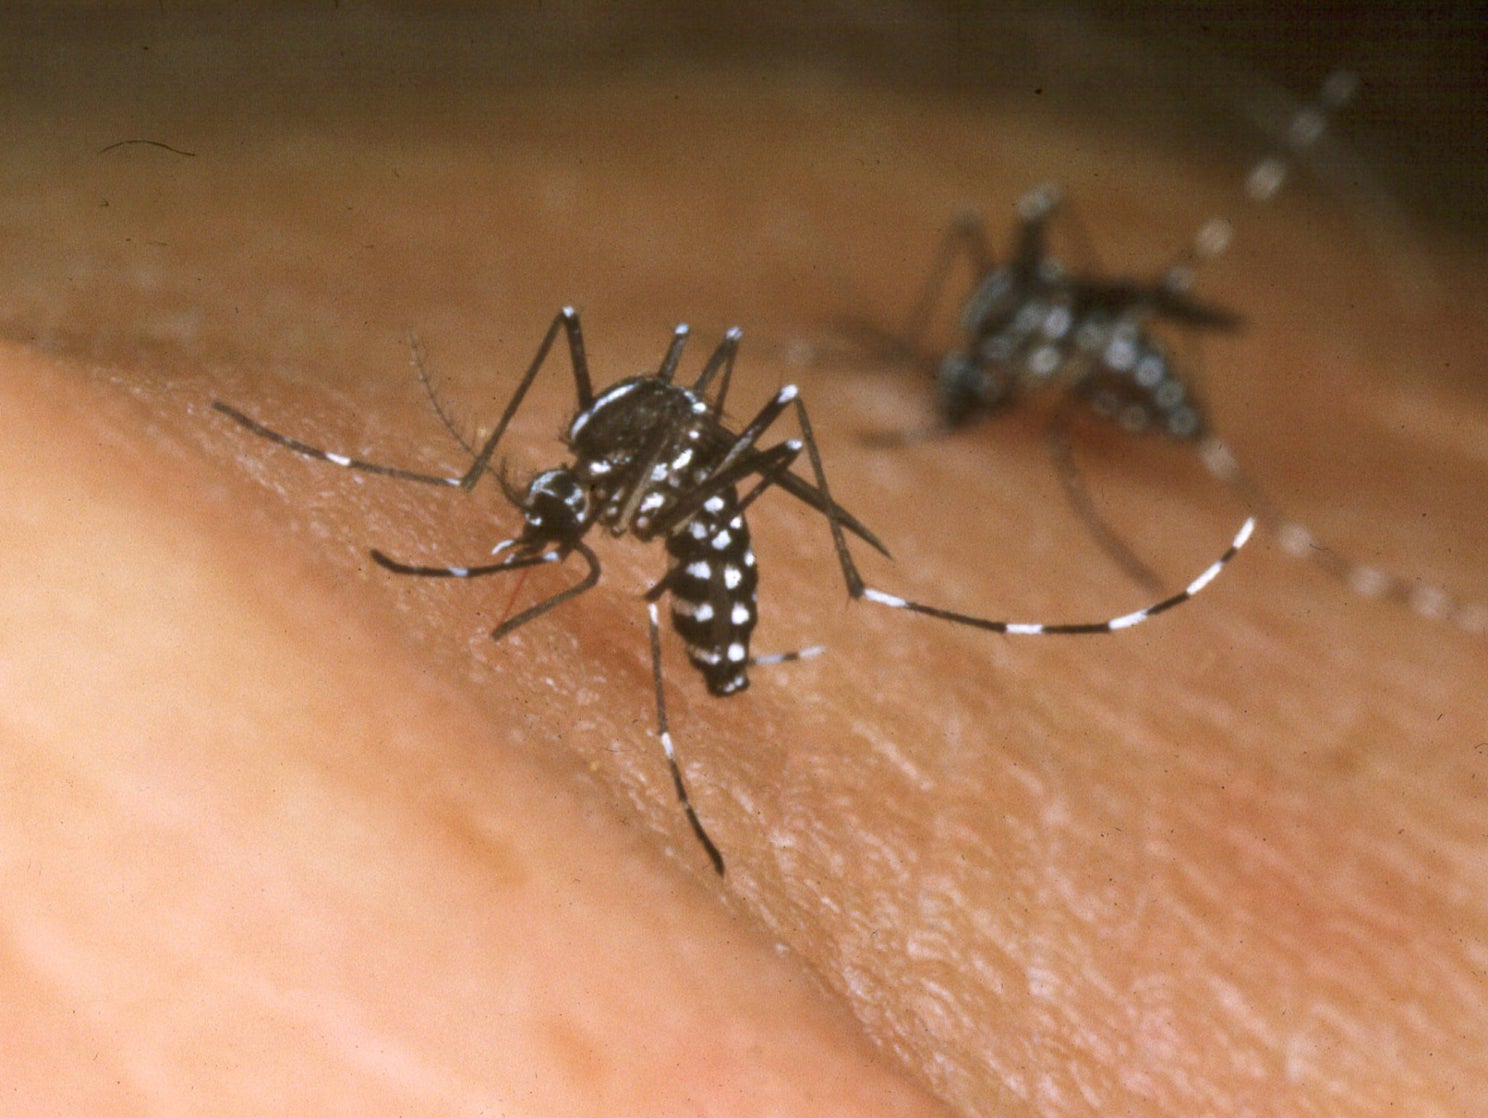 Mosquitoes could spread viruses further afield as the globe warms